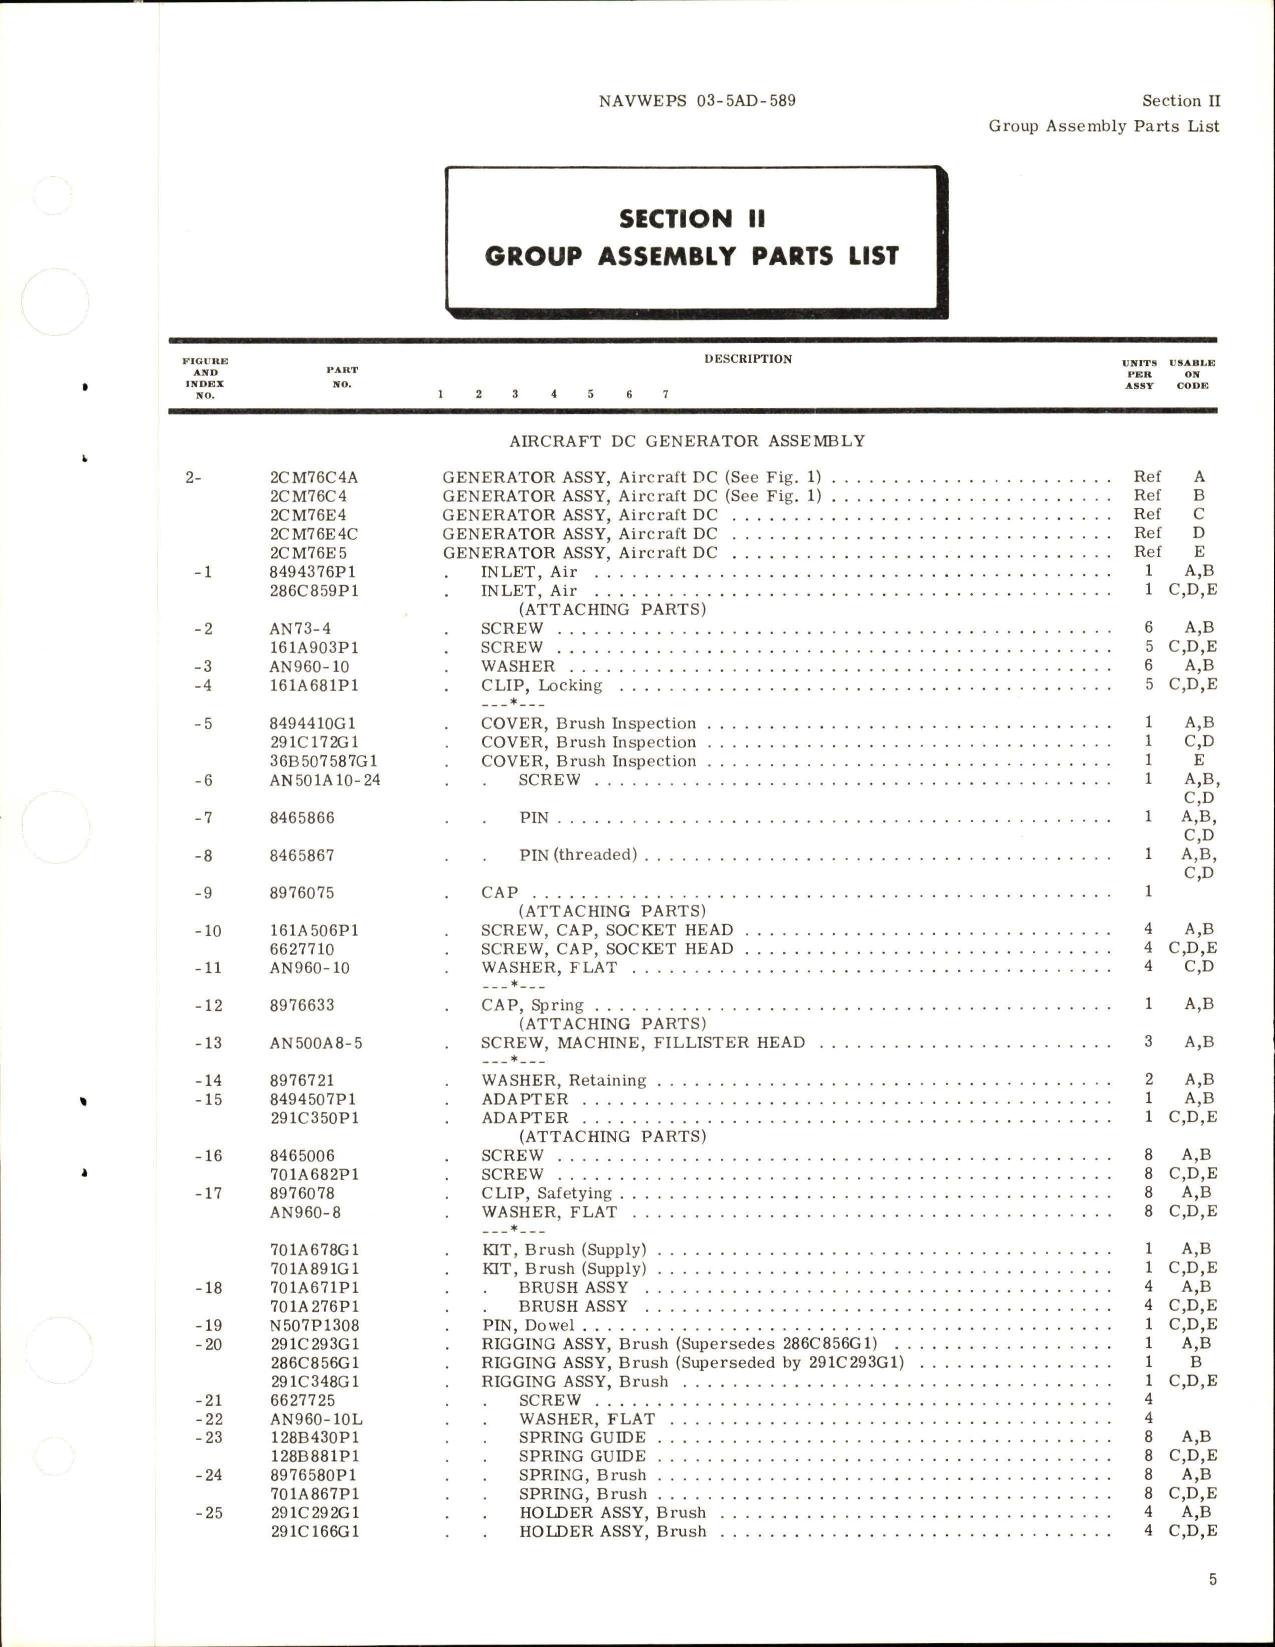 Sample page 7 from AirCorps Library document: Illustrated Parts Breakdown for DC Generators - Models 2CM76C4, 2CM76C4A, 2CM76E4, 2CM76E4C, and 2CM76E5 